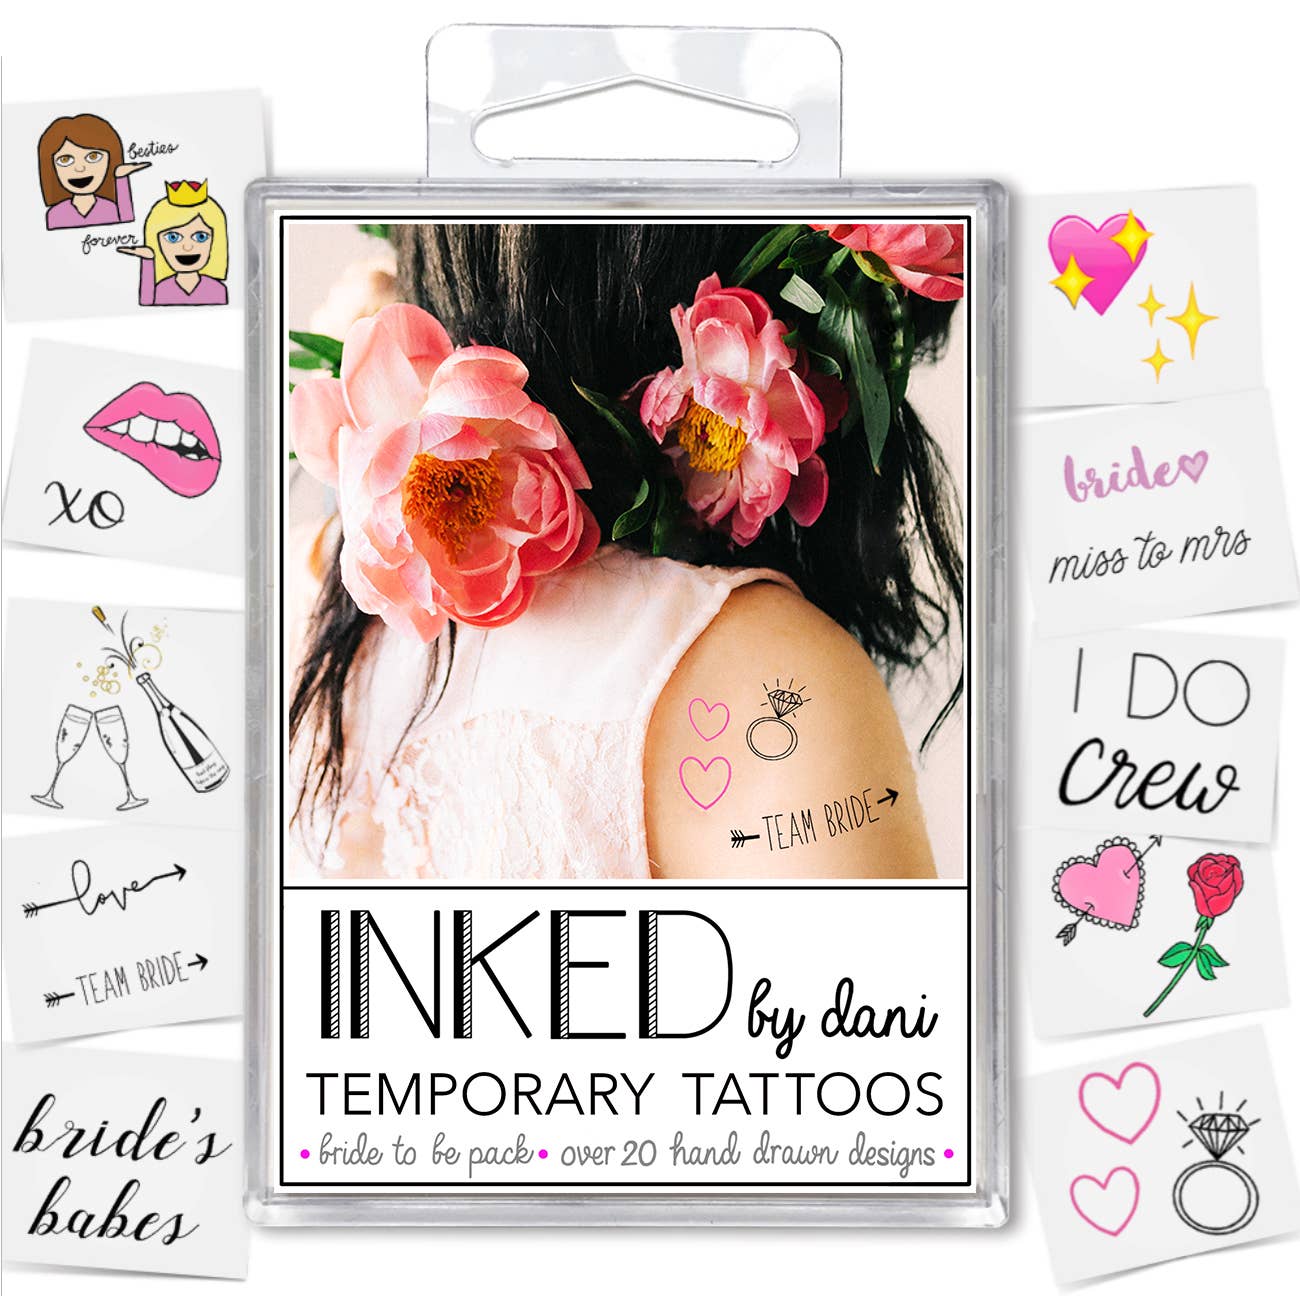 TAT PACK - BRIDE TO BE